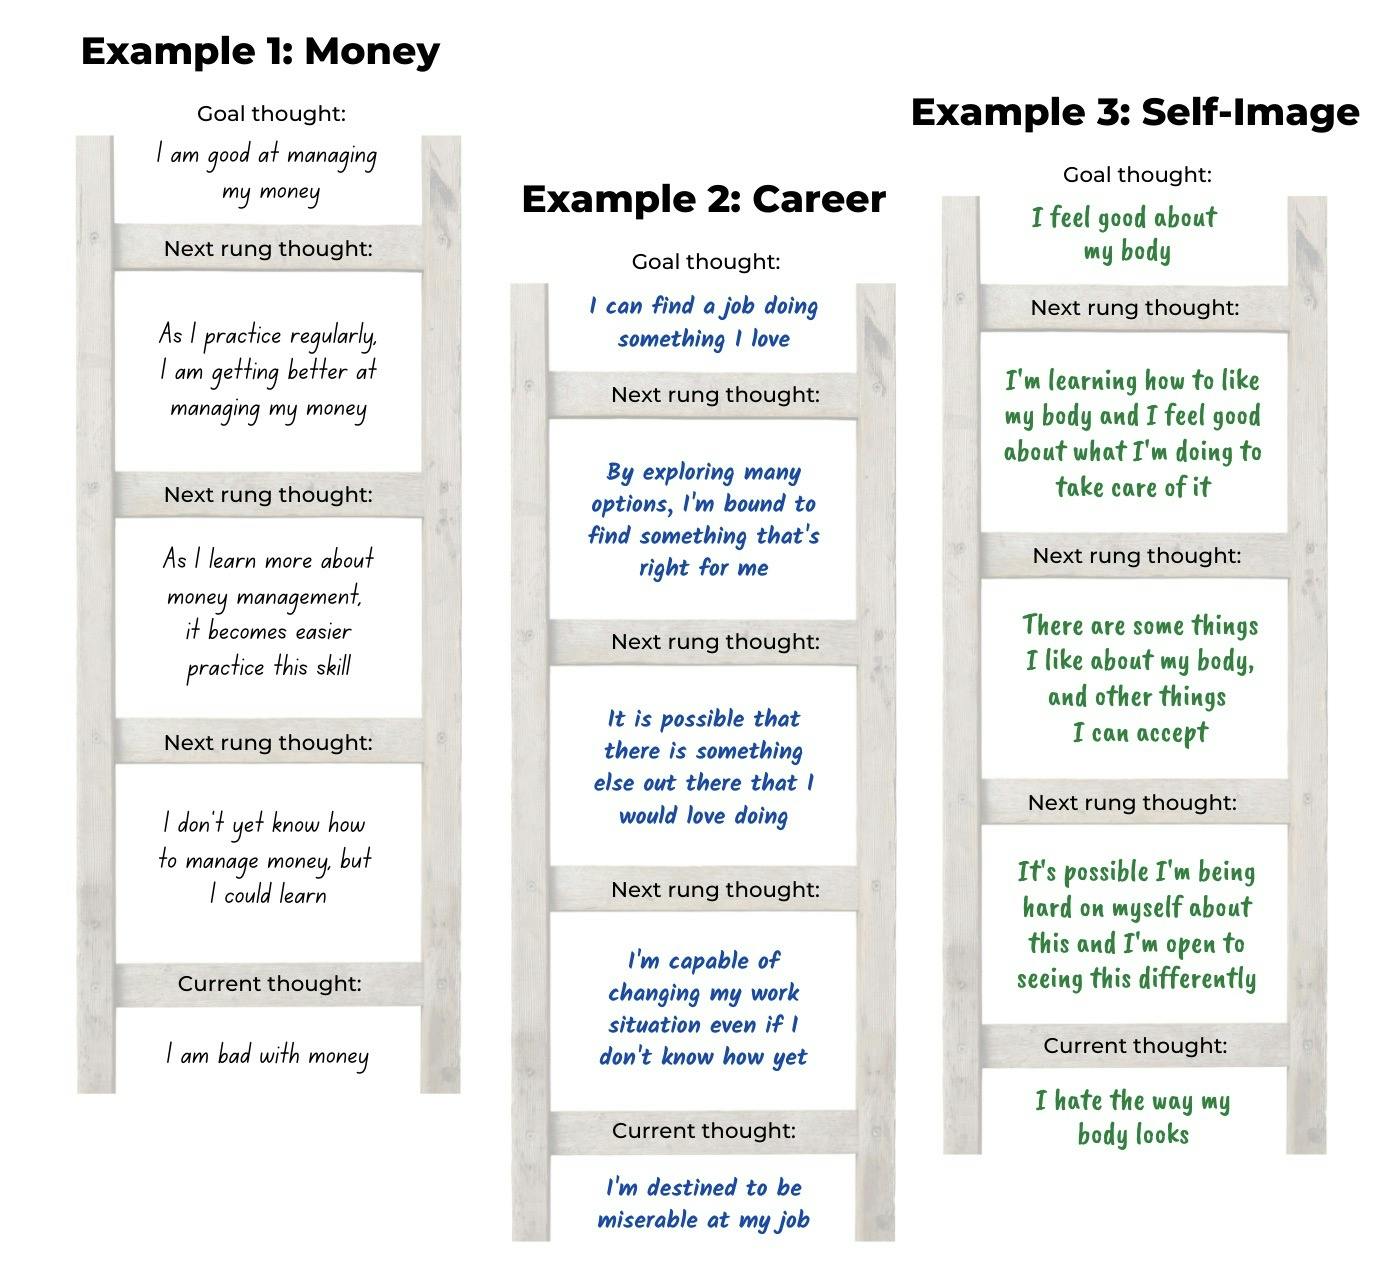 Example thought ladders for money, career, and self-image